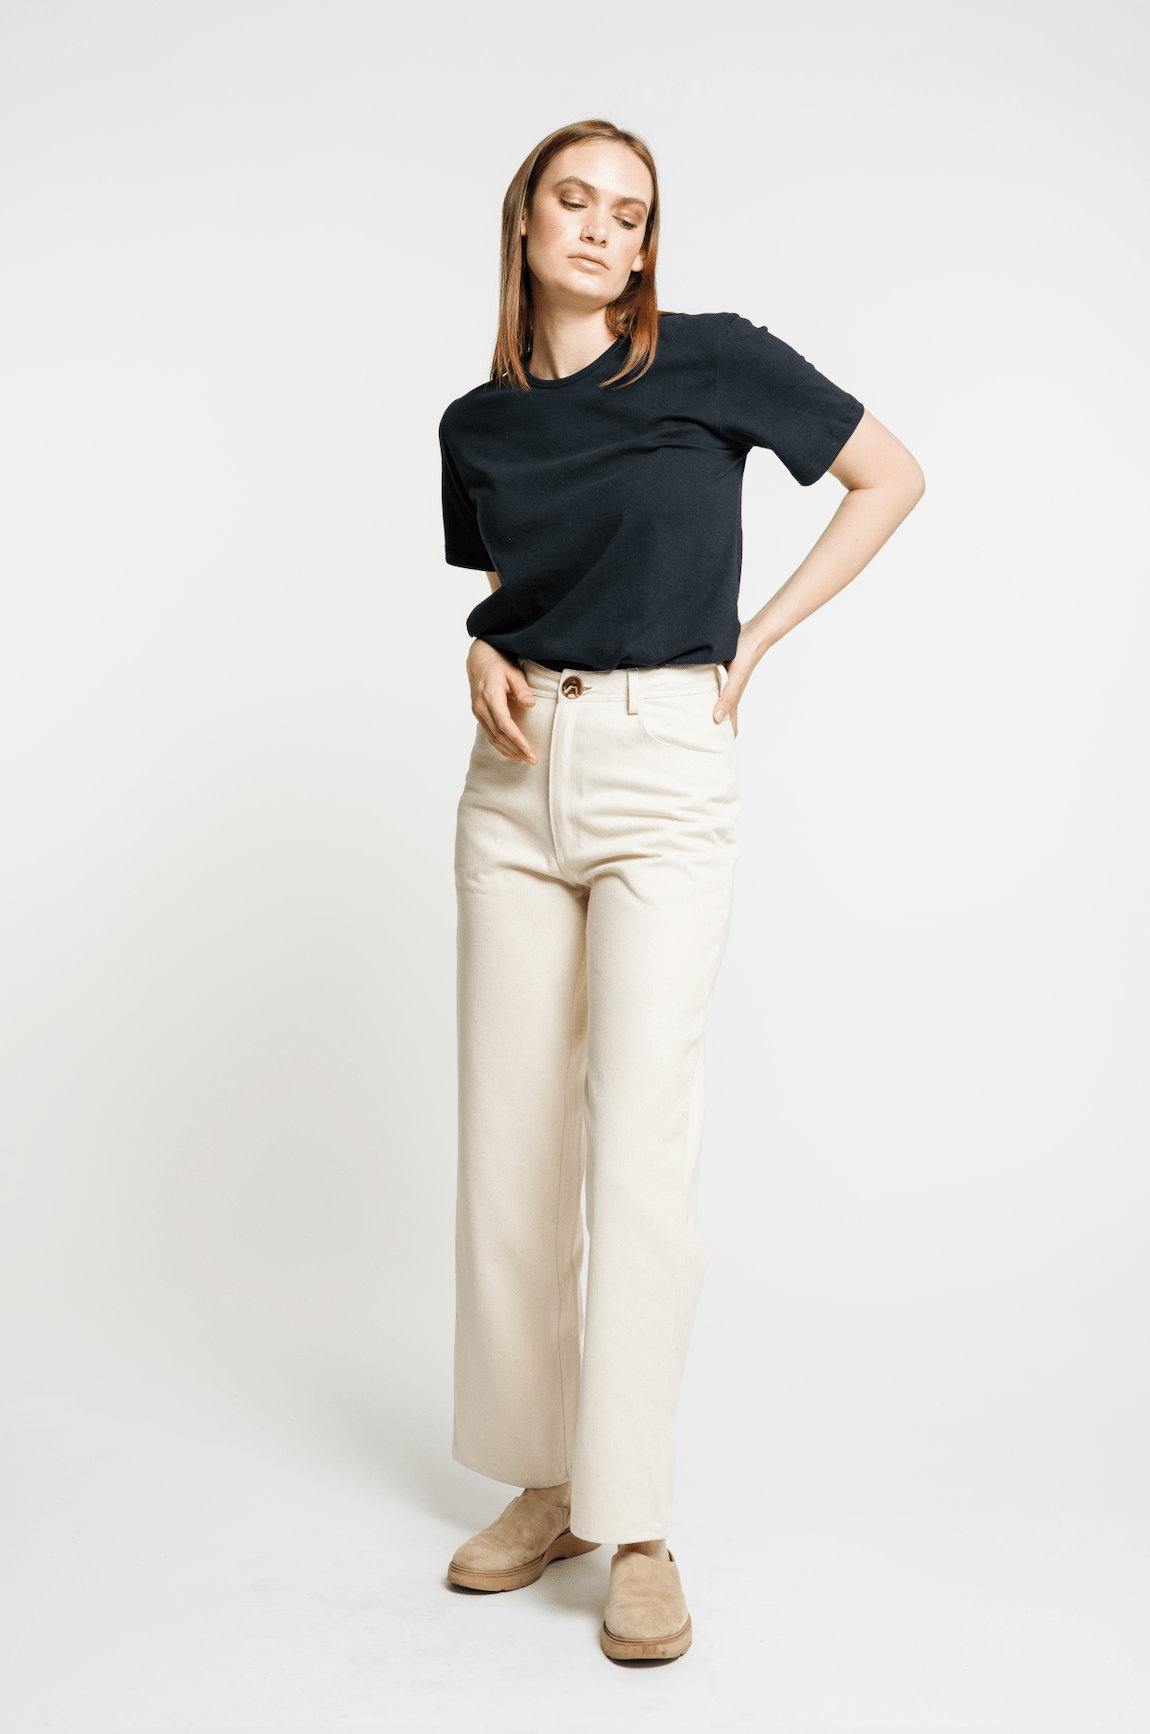 The model is sporting a black t-shirt and beige Camp Pant - Bone - Sample.